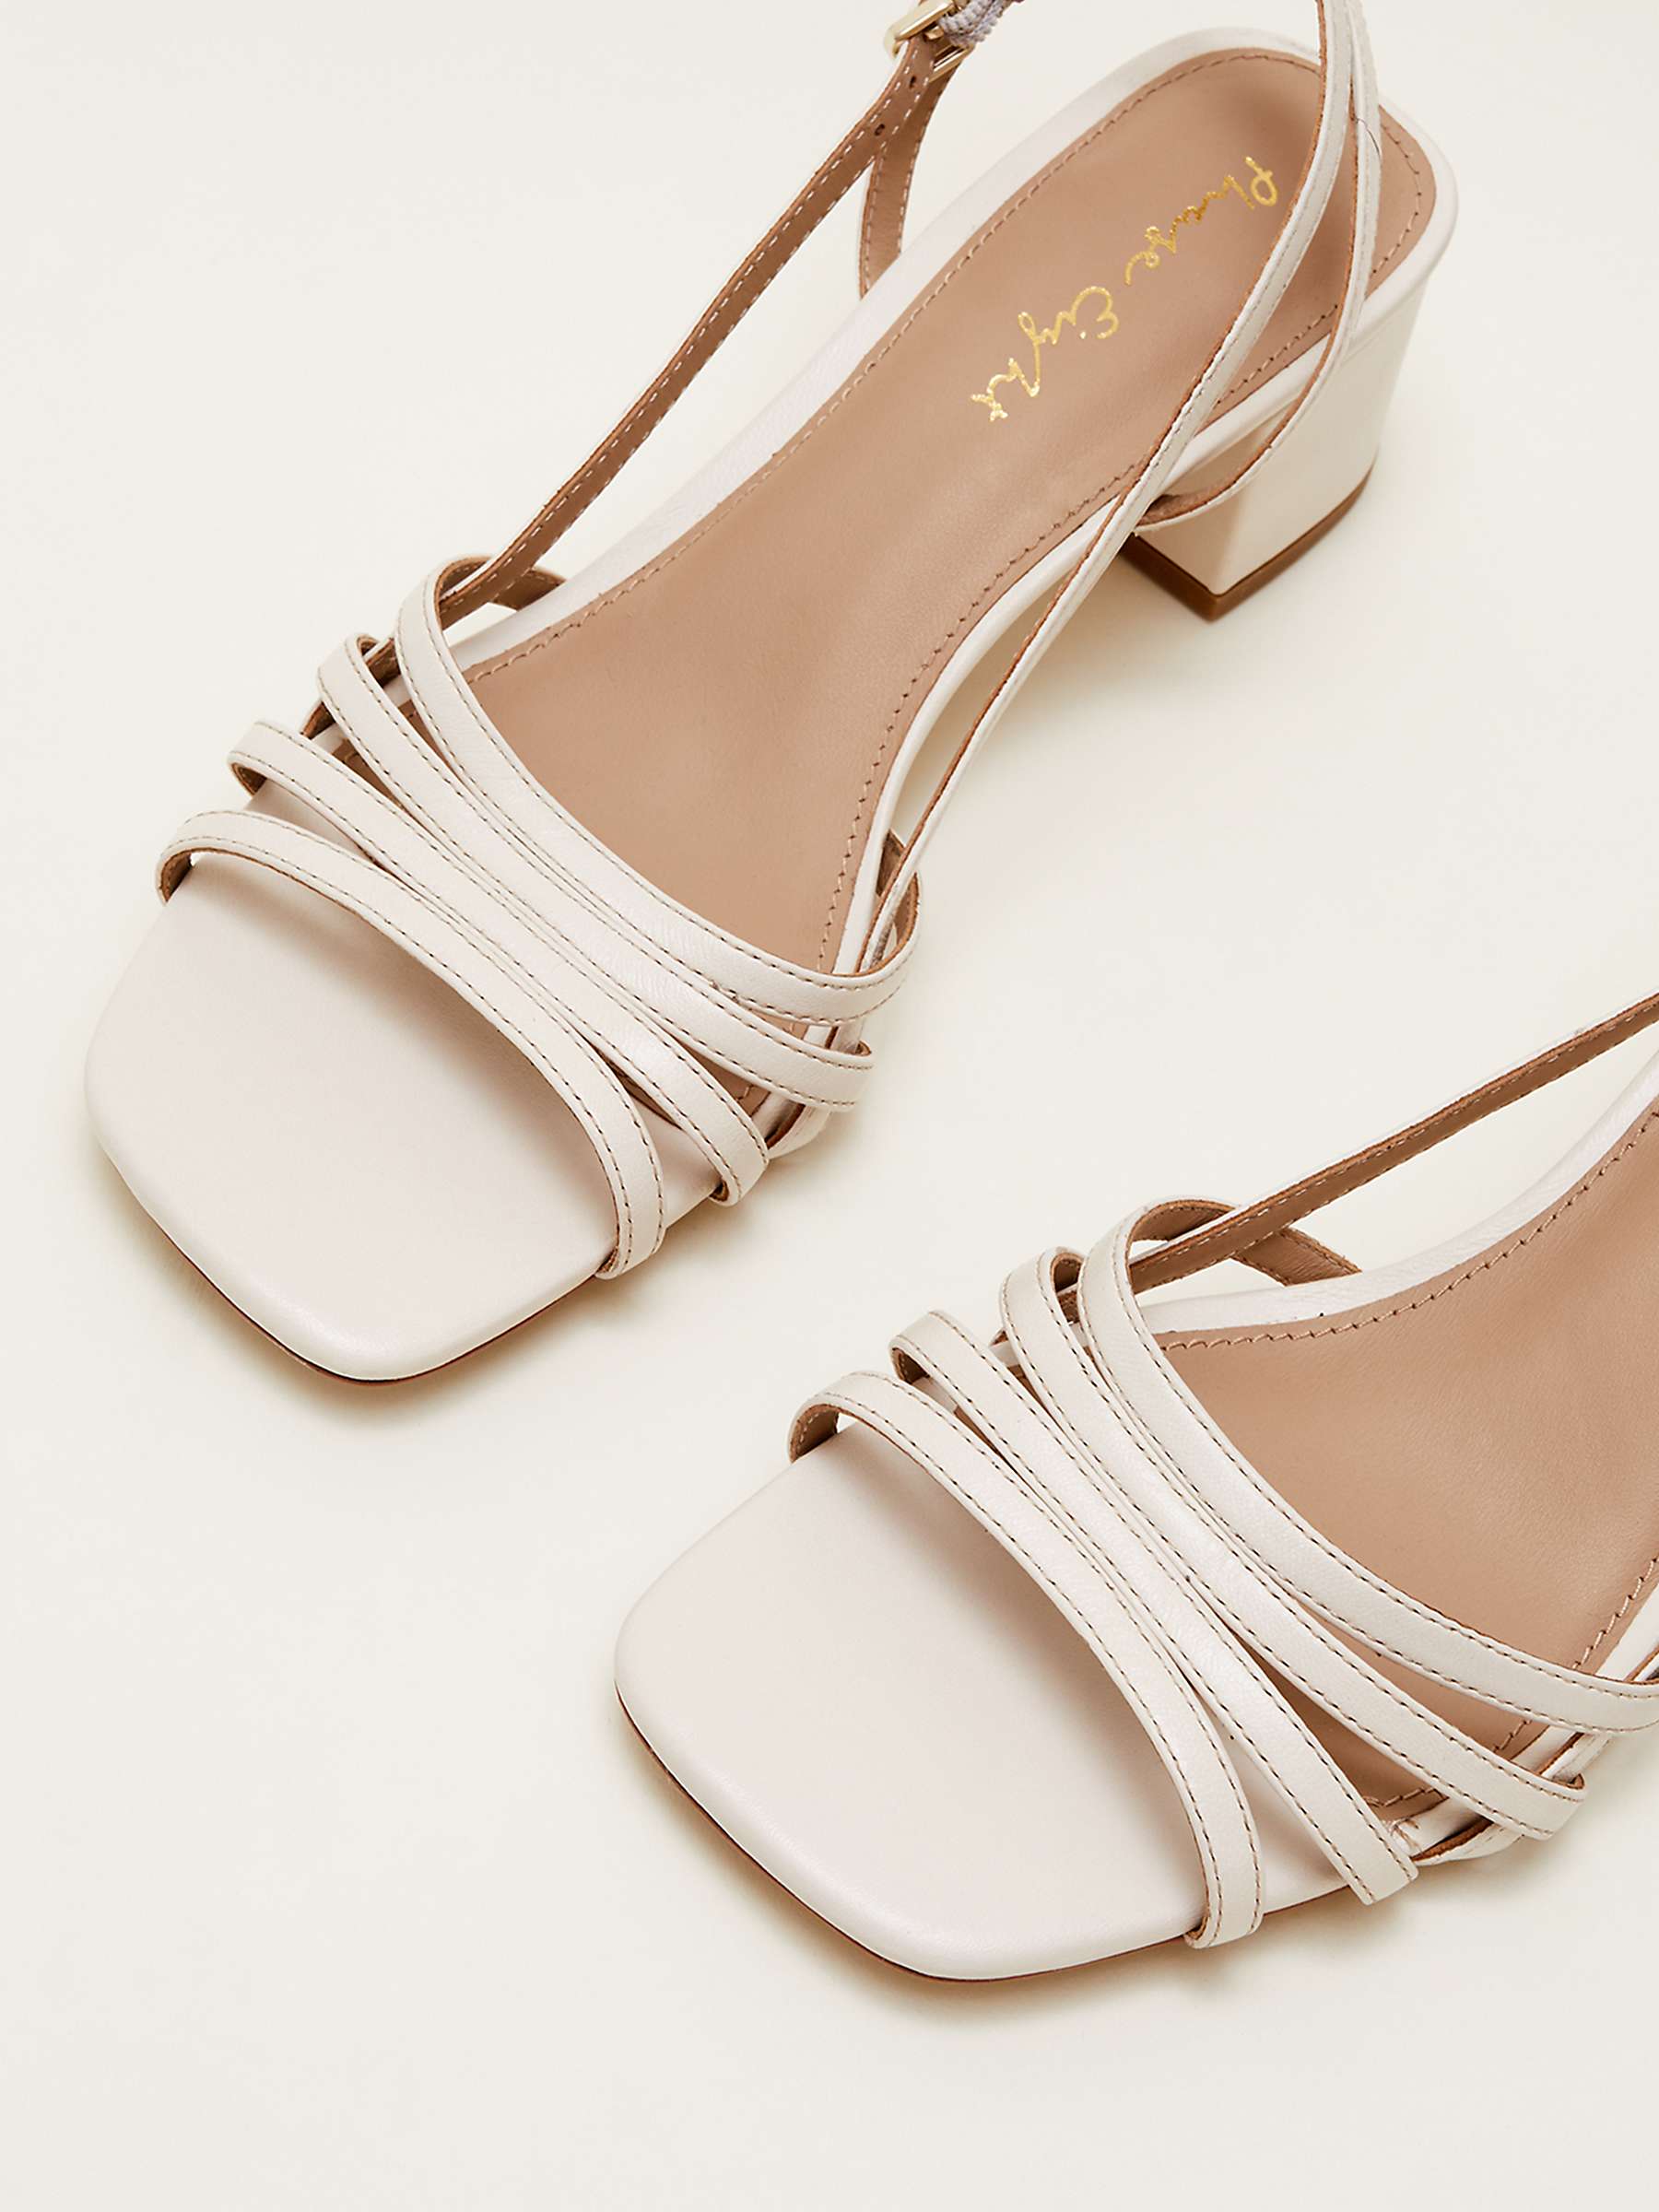 Buy Phase Eight Block Heel Leather Slingback Sandals, Cream Online at johnlewis.com